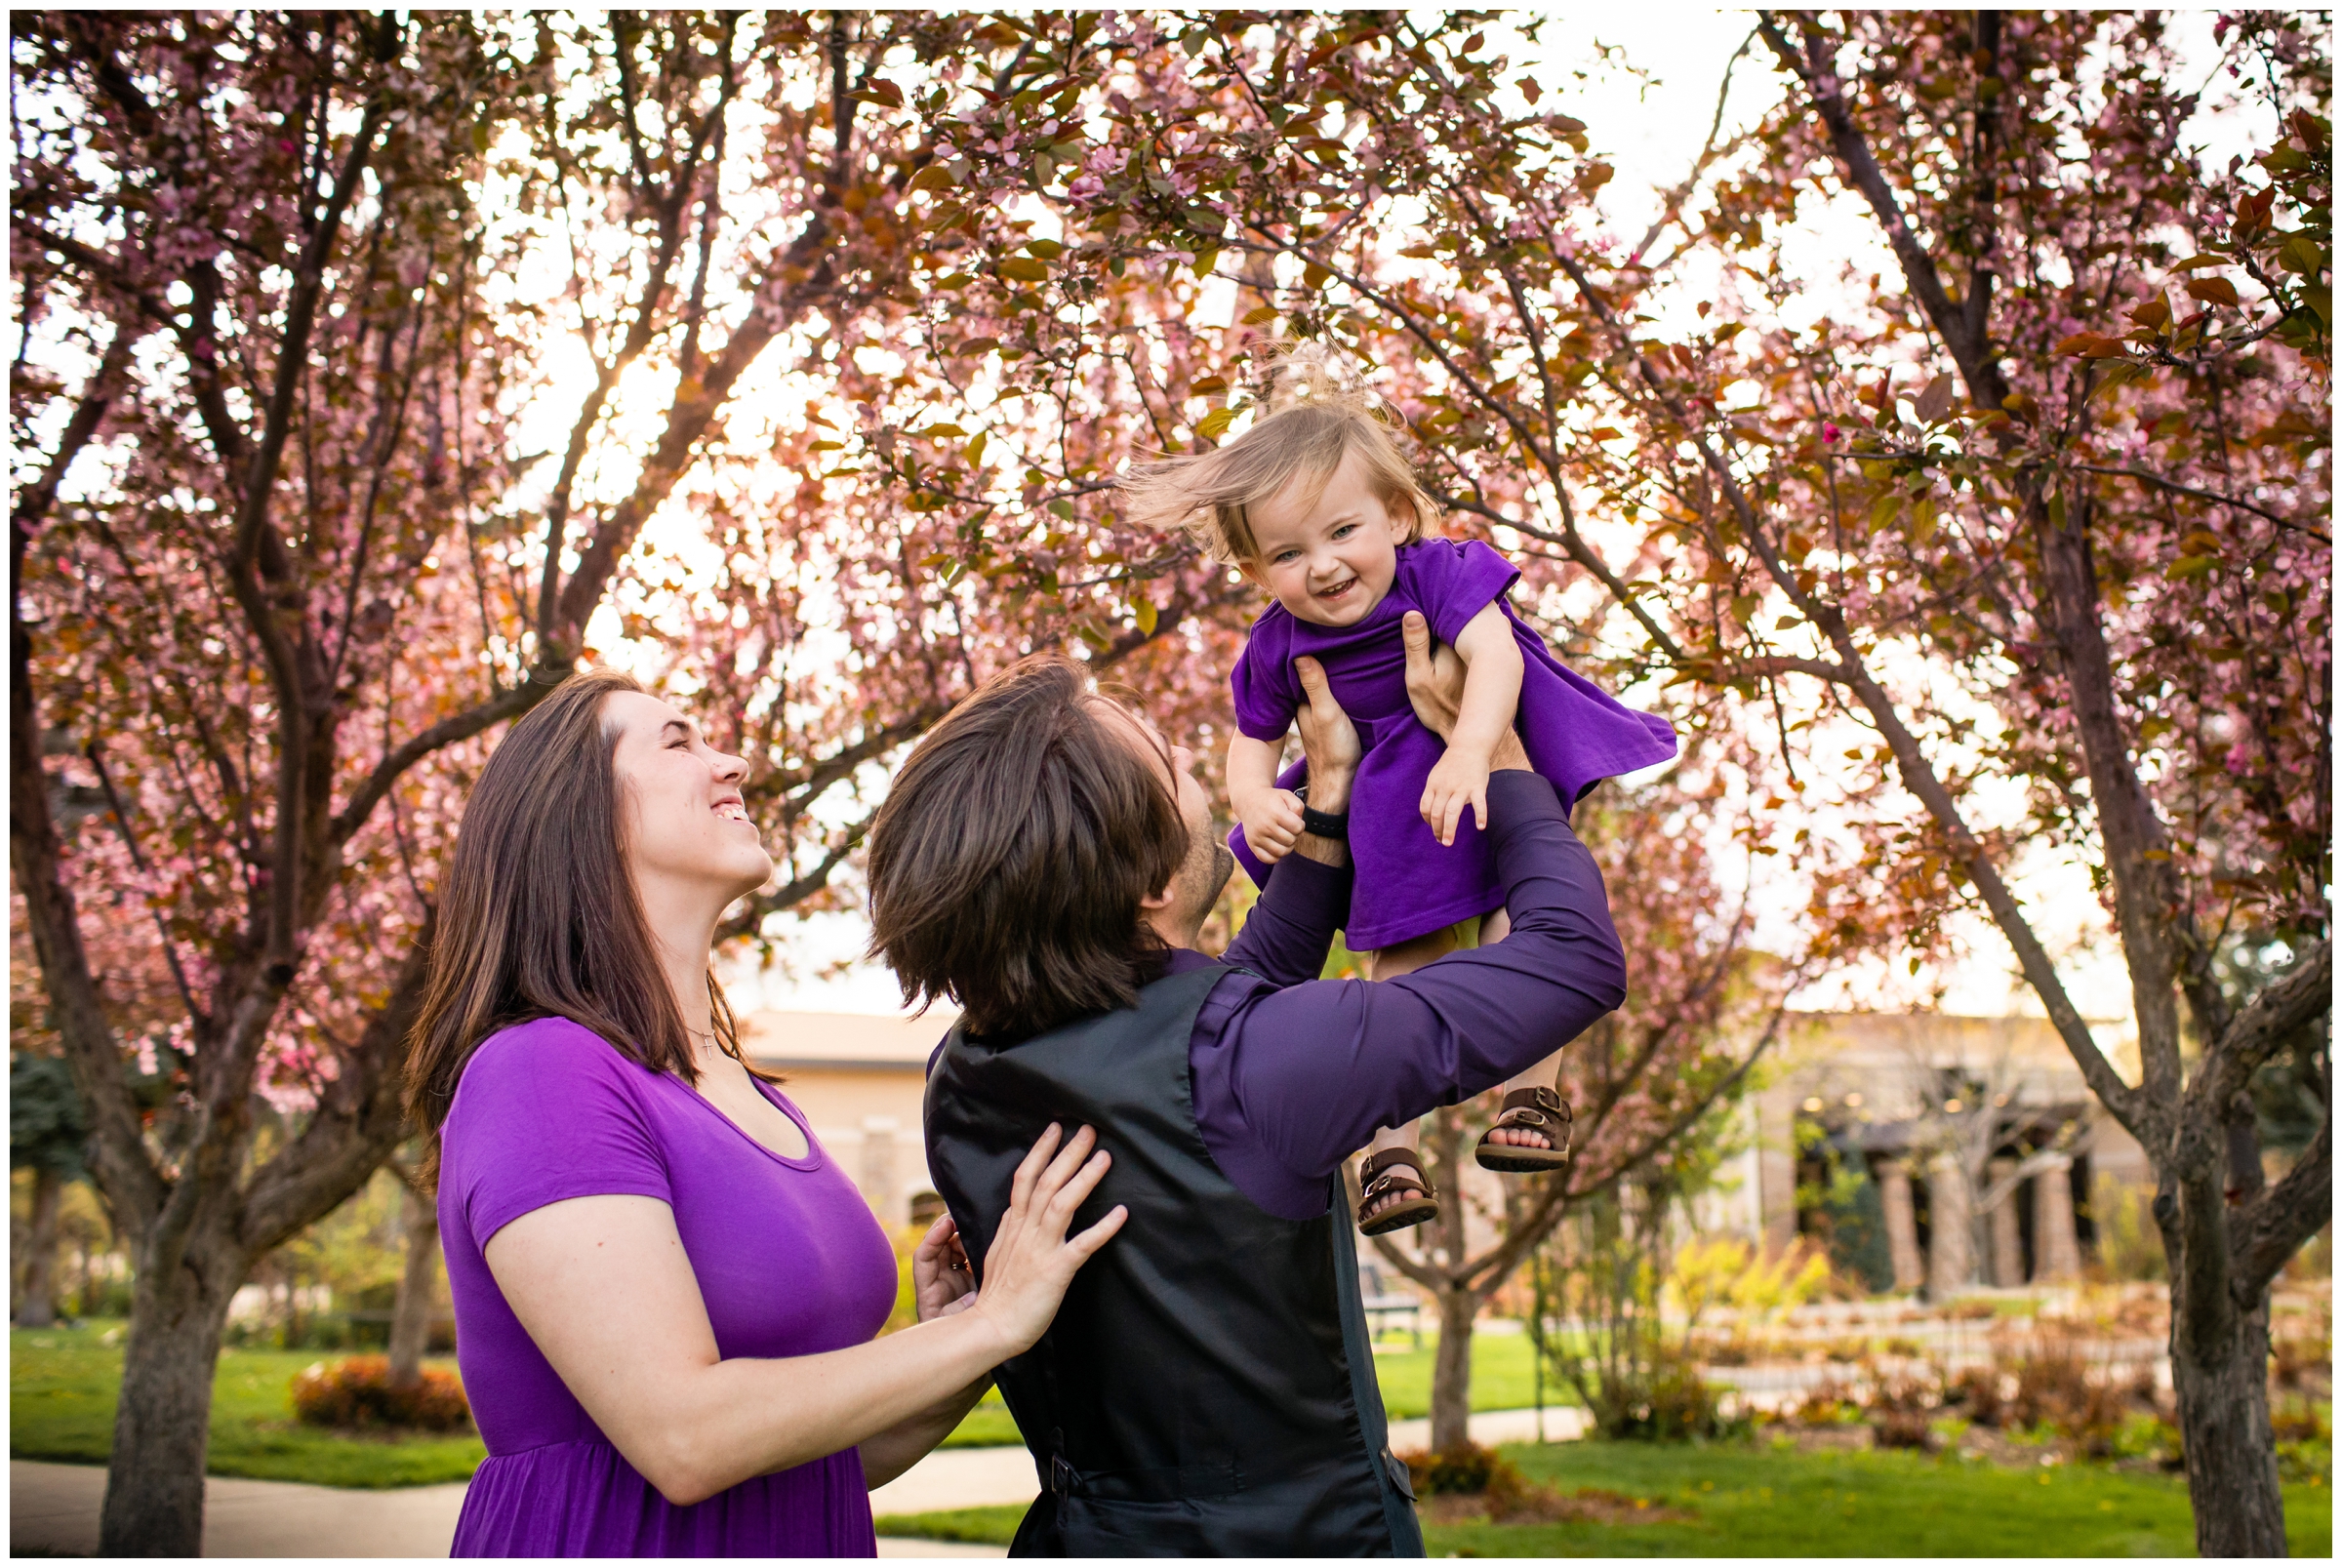 dad lifting daughter into the air during spring family photo shoot with the crab apple blossoms during Longmont Colorado family photos 